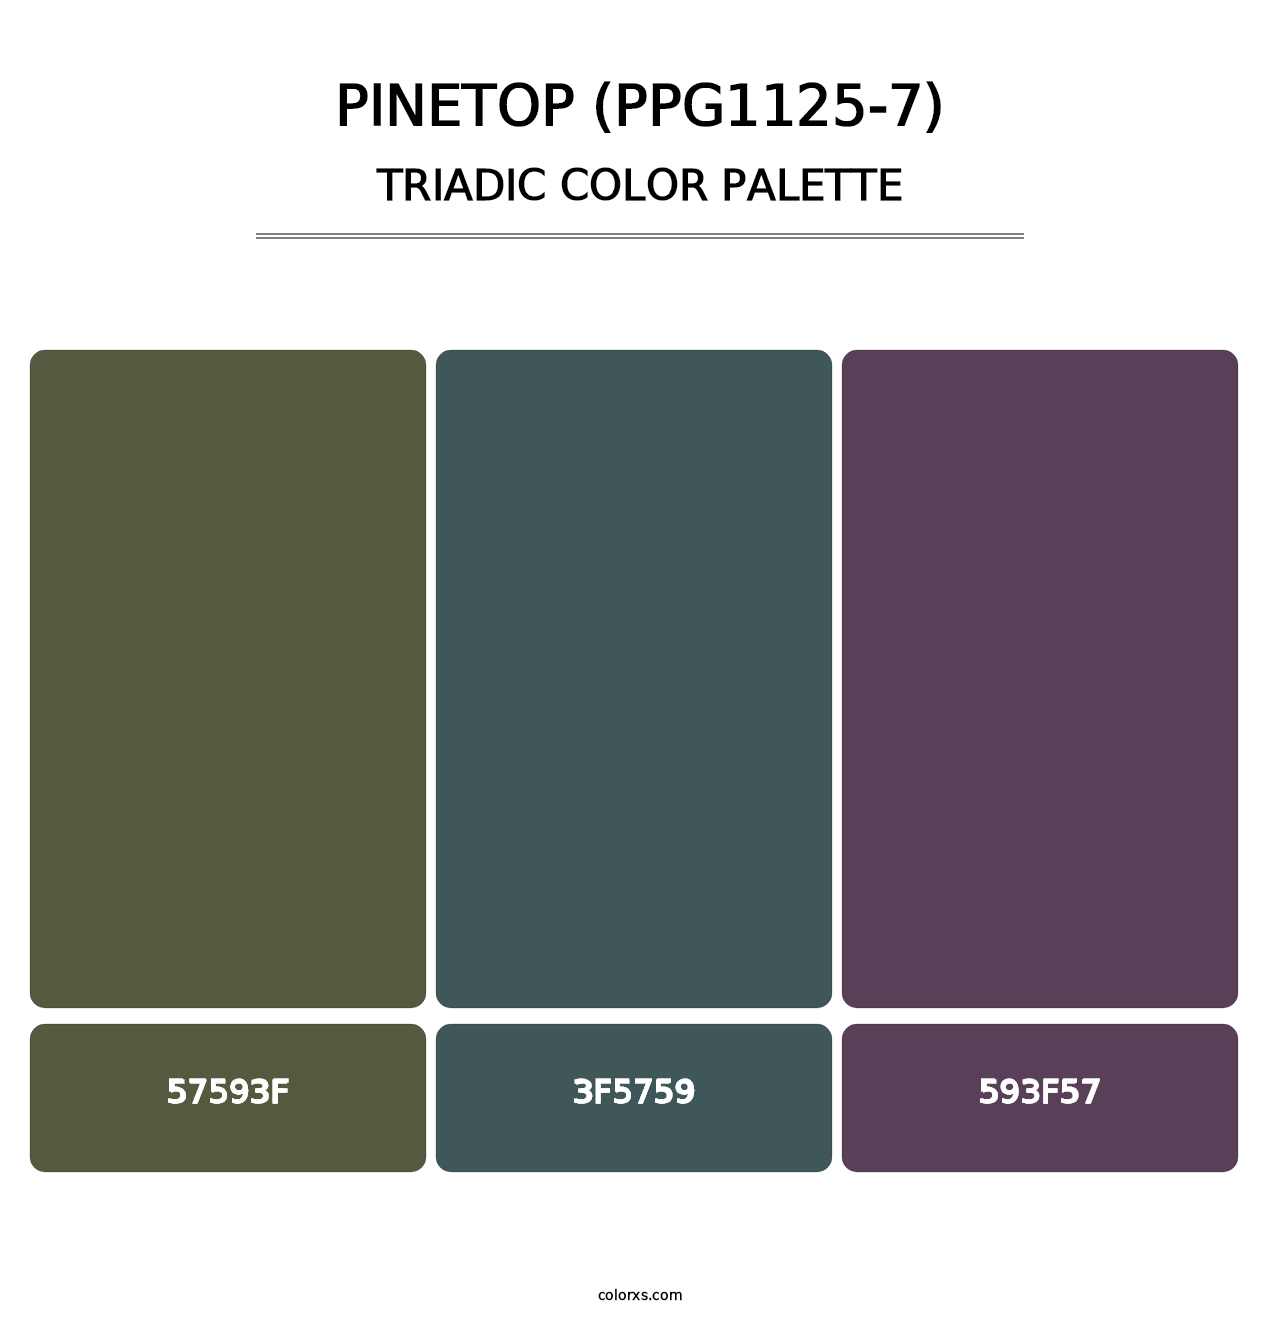 Pinetop (PPG1125-7) - Triadic Color Palette